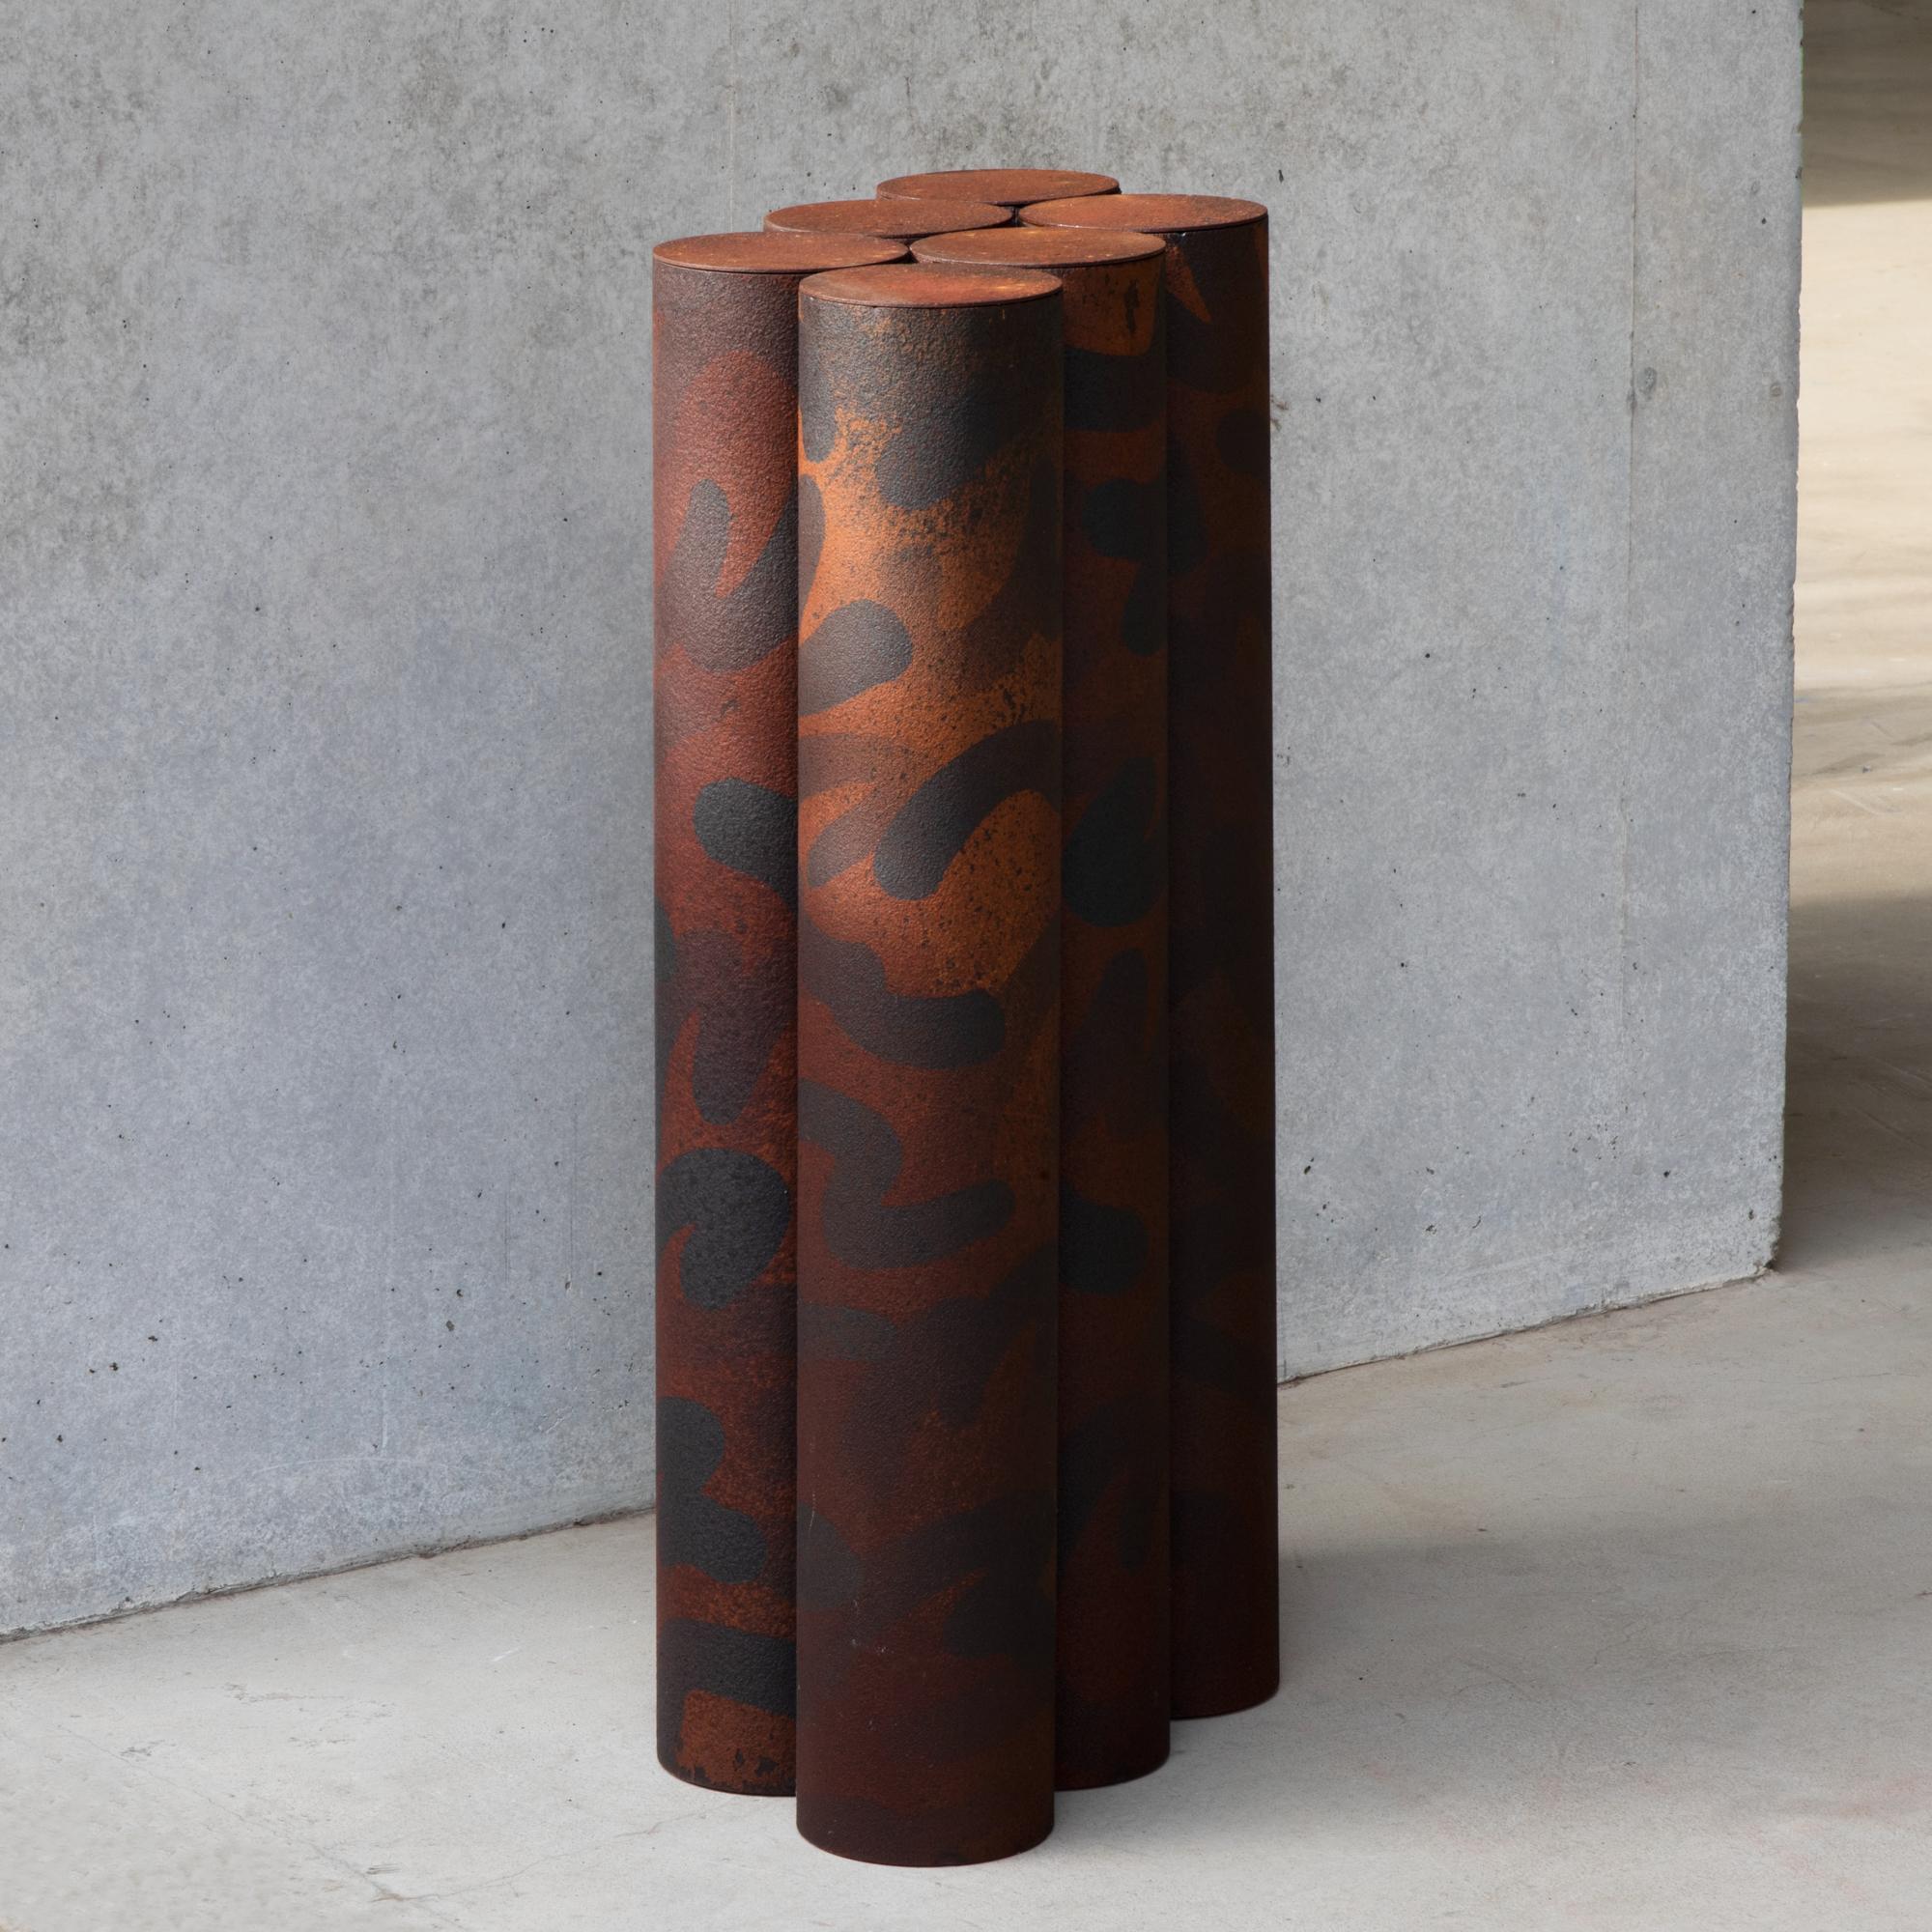 Sculpture or slender console designed by Ryota Akiyama.
Made of steel board. Patterns have been created with getting rust.
 